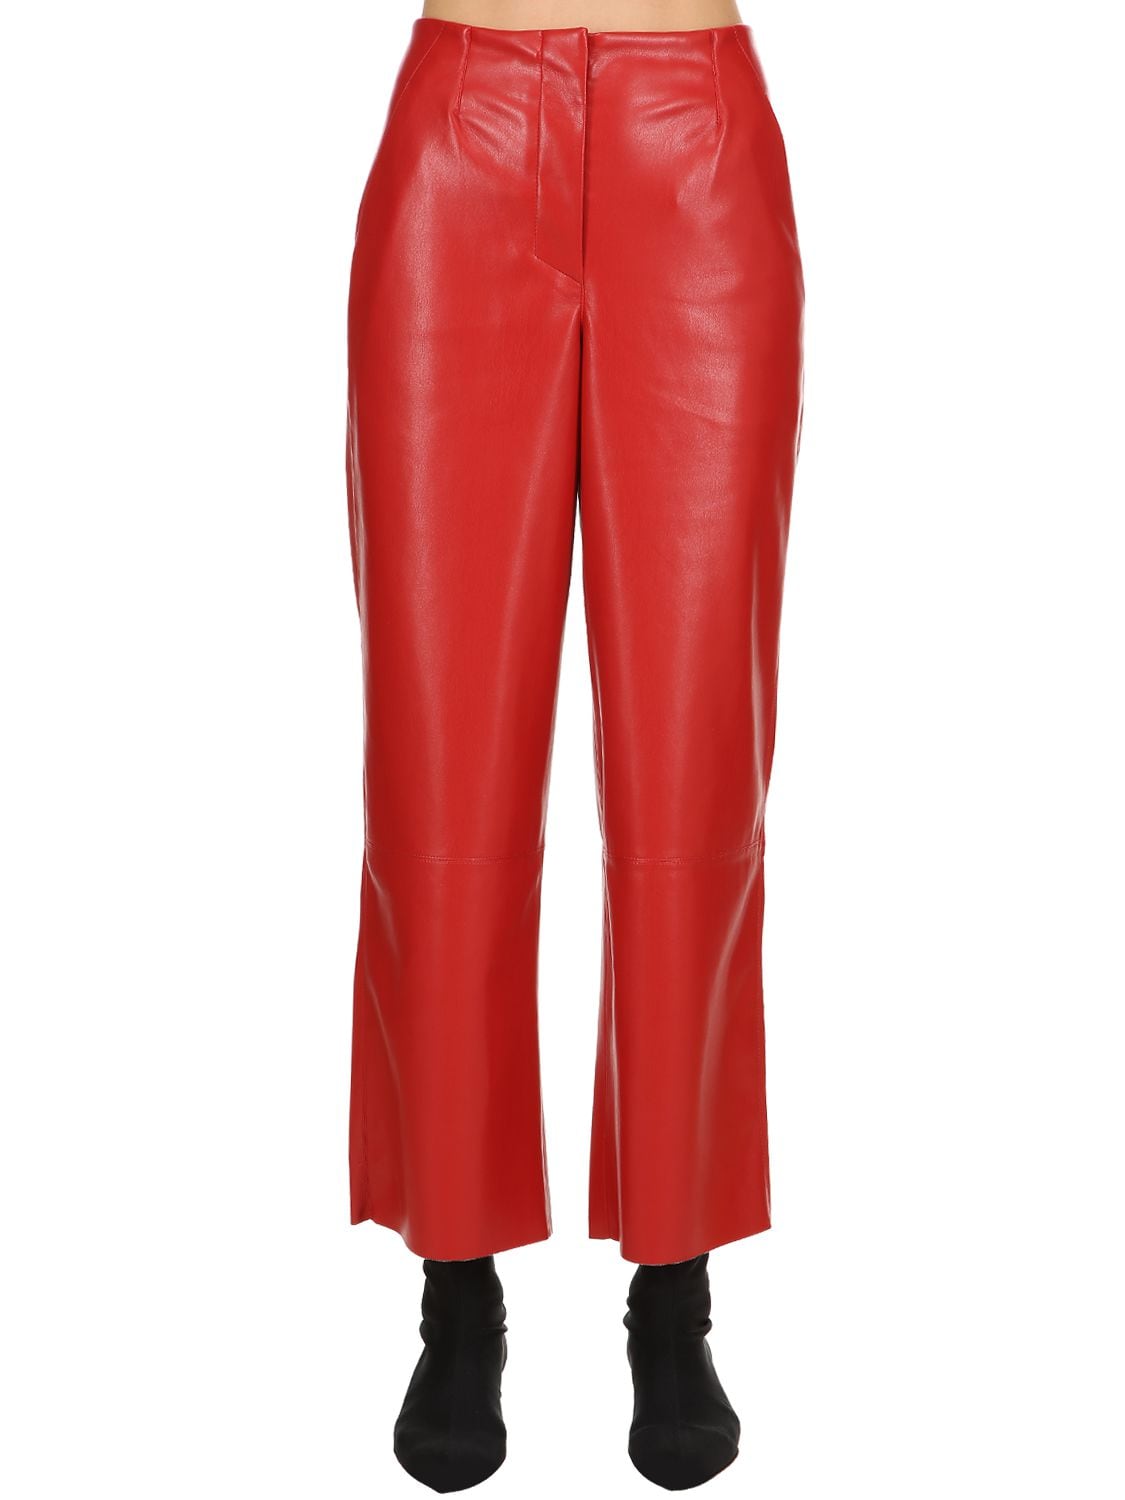 red faux leather pants